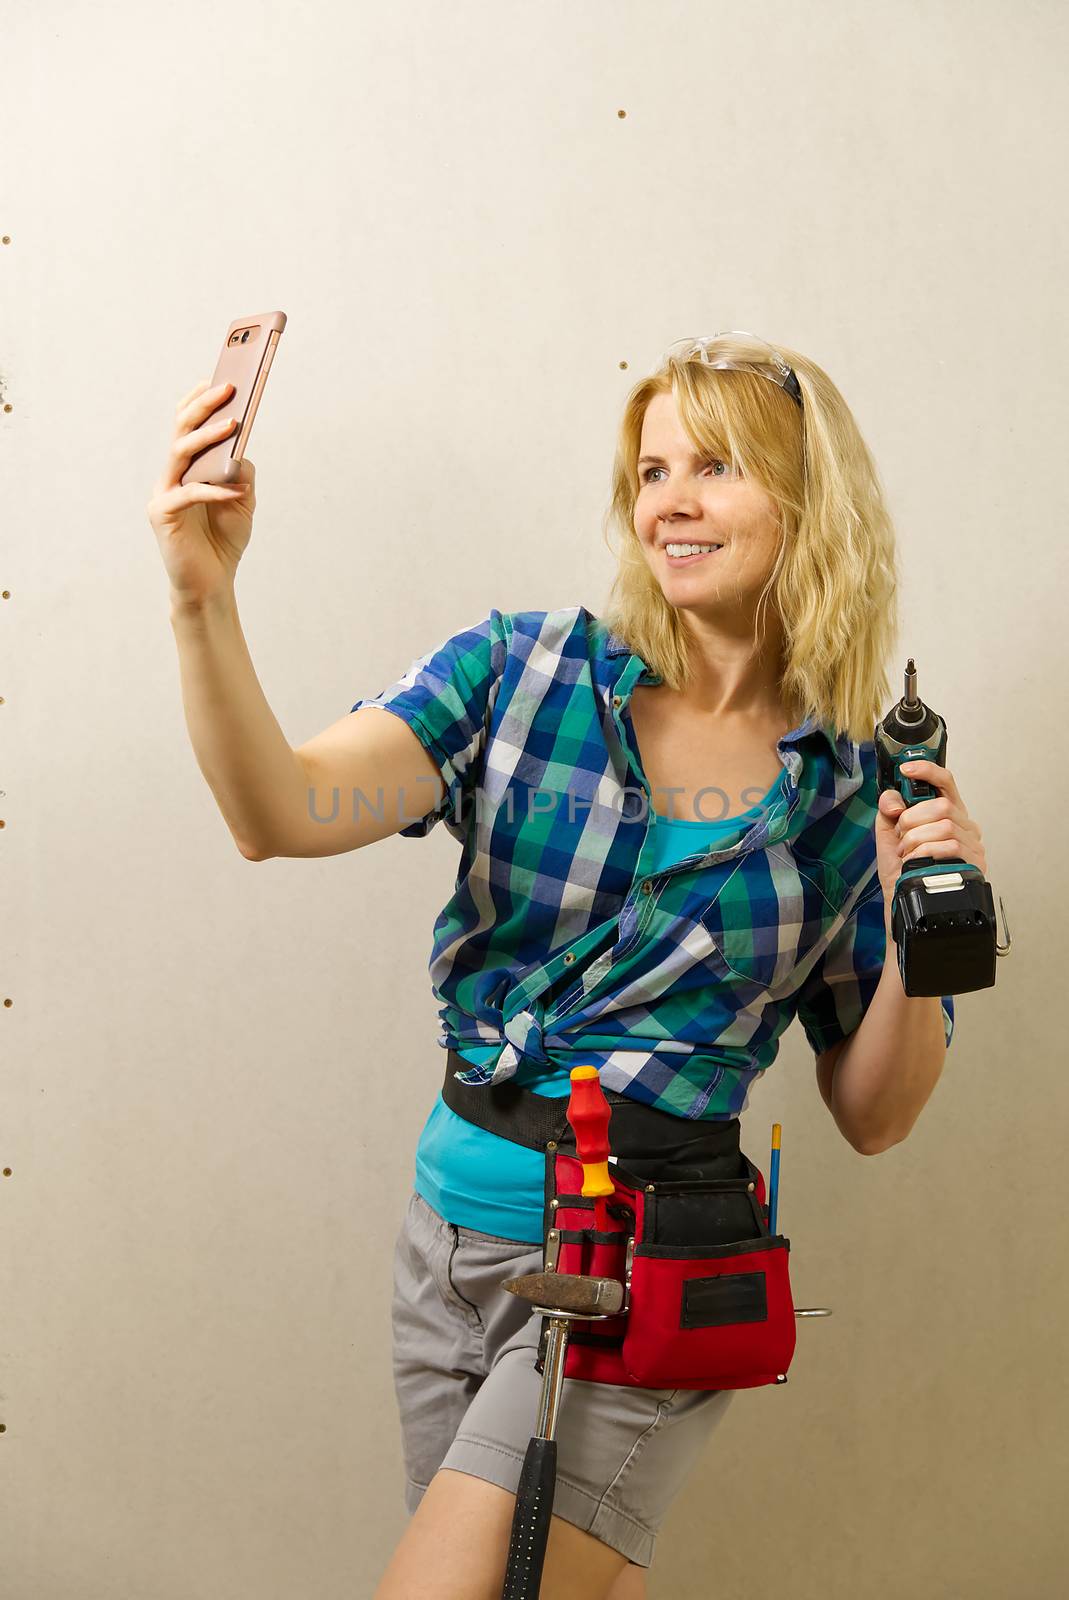 Blond woman wearing a DIY tool belt full of a variety of tools on a unpainted plasterboard wall background. Construction woman concept. by PhotoTime